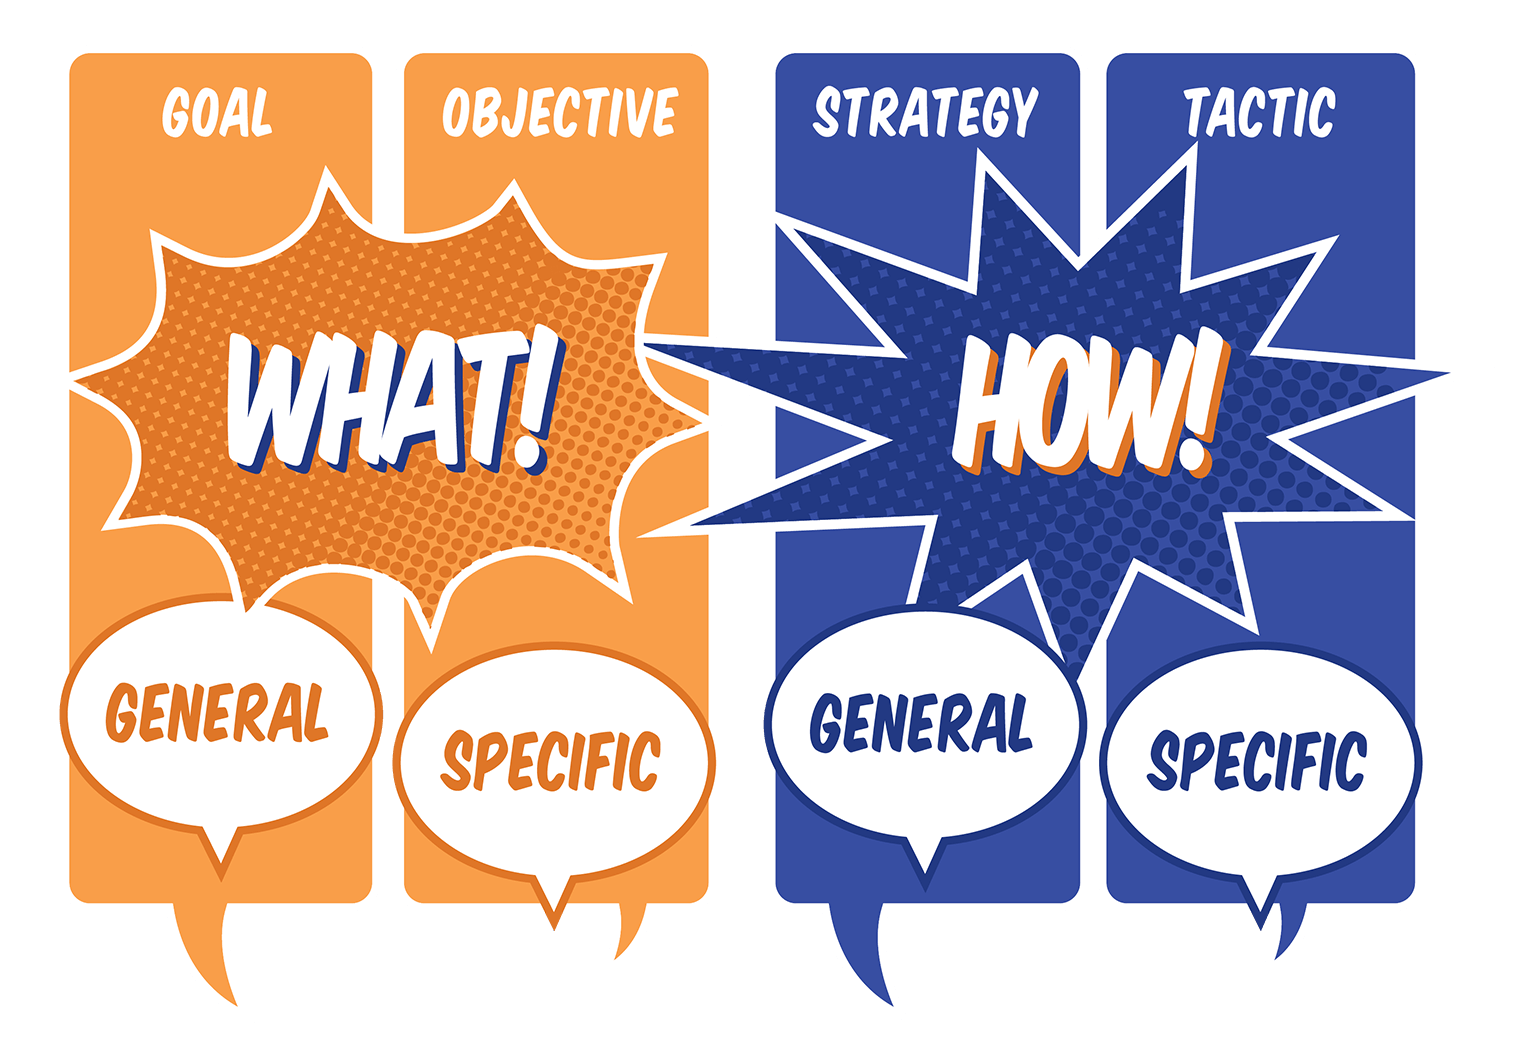 GOST Framework by Rich Horwath, shows goal, objective, strategy, tactic and then general and specific under each of the 4 words. 